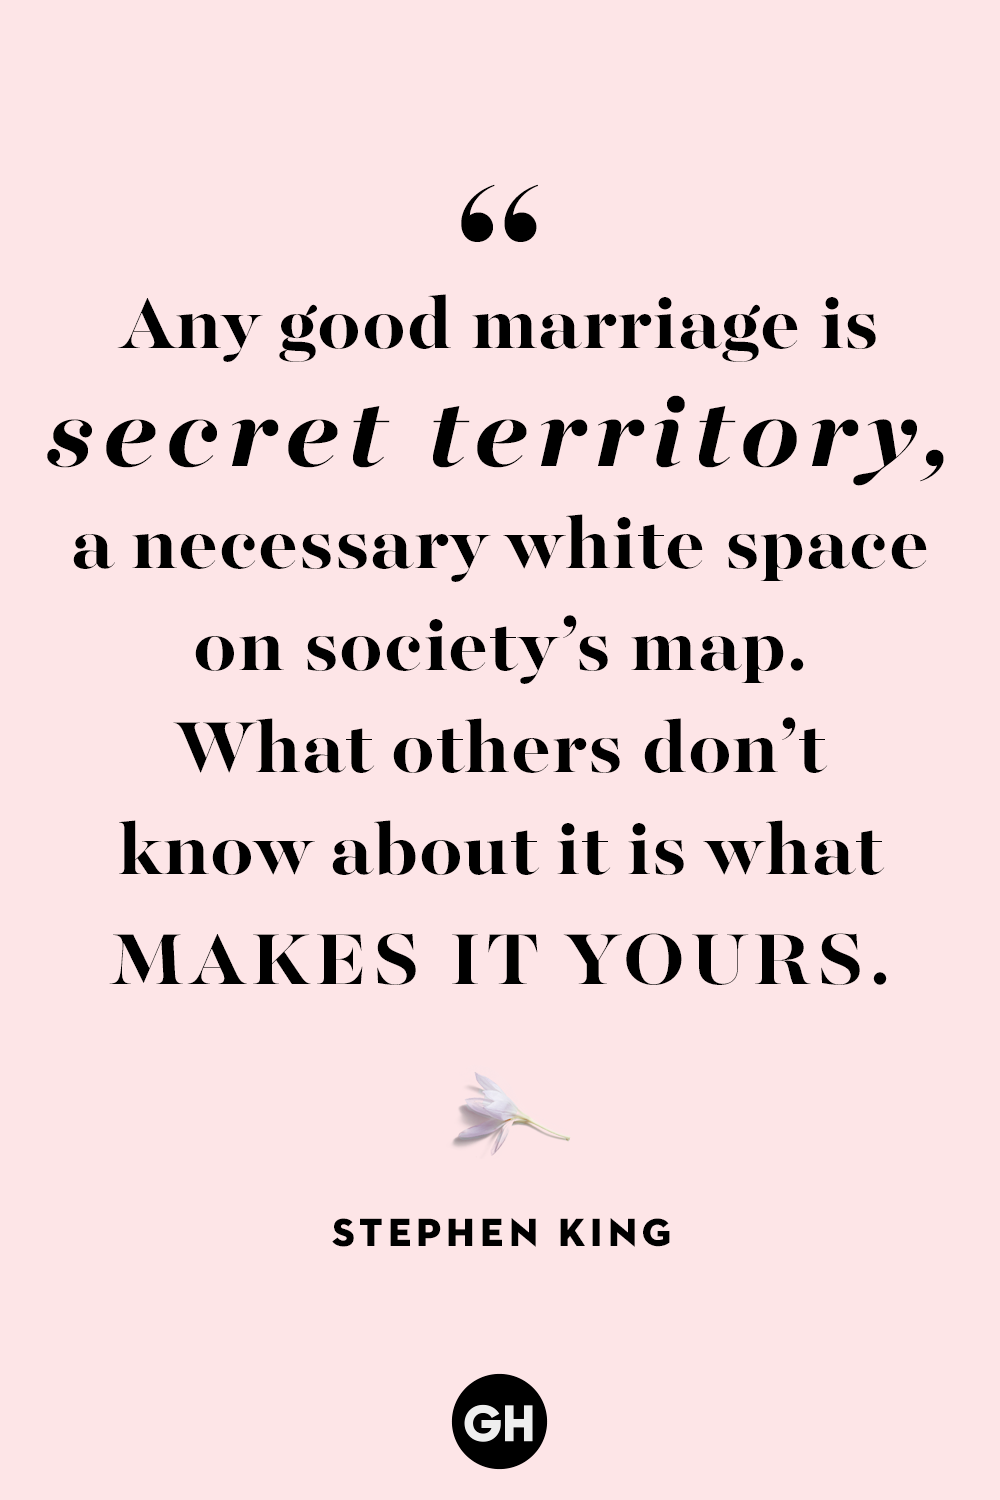 Isn t easy quotes marriage 100 Inspirational